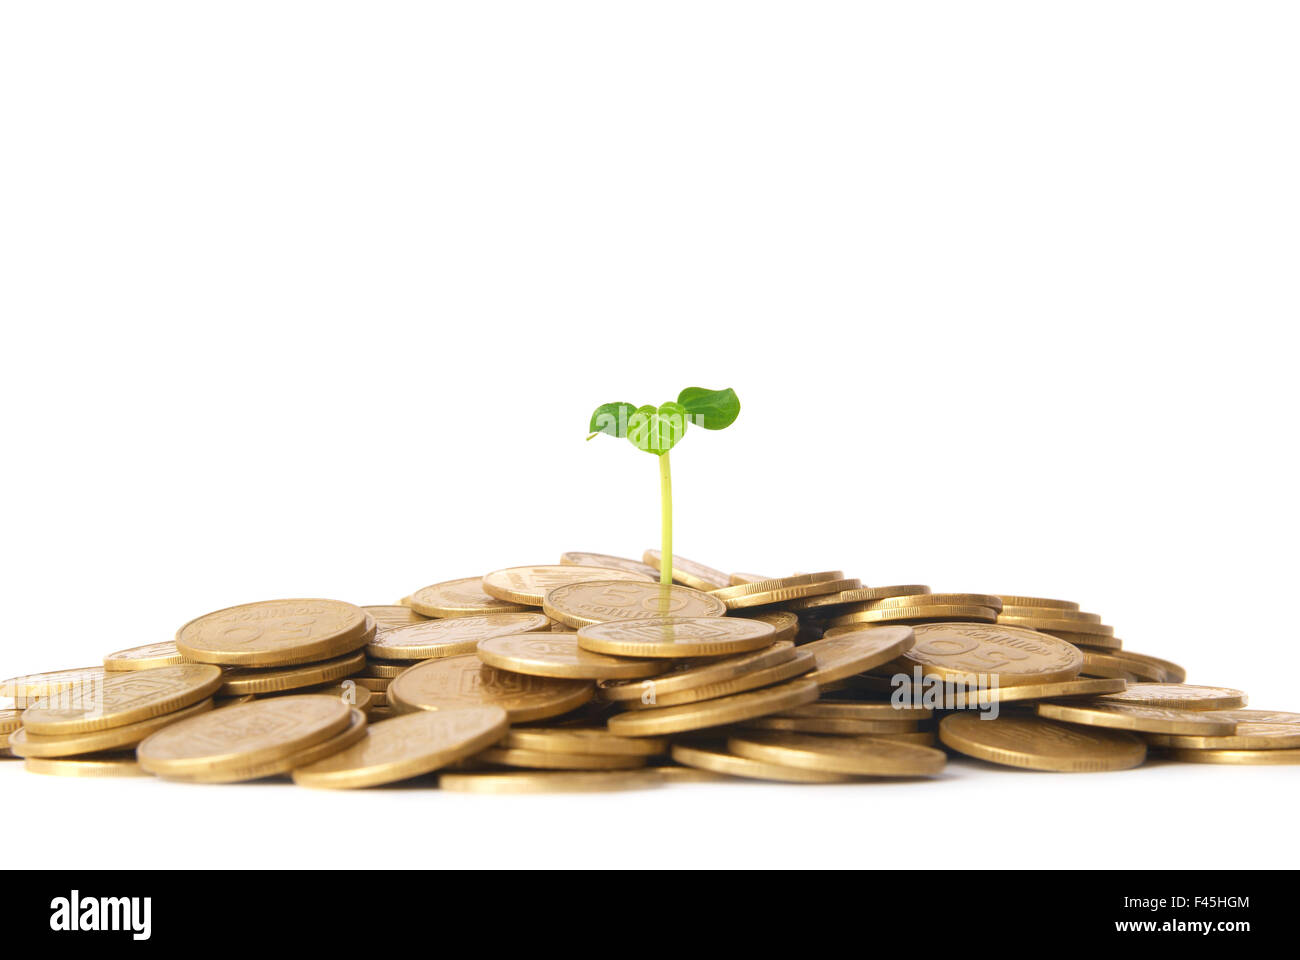 Green plant growing from the coins Stock Photo